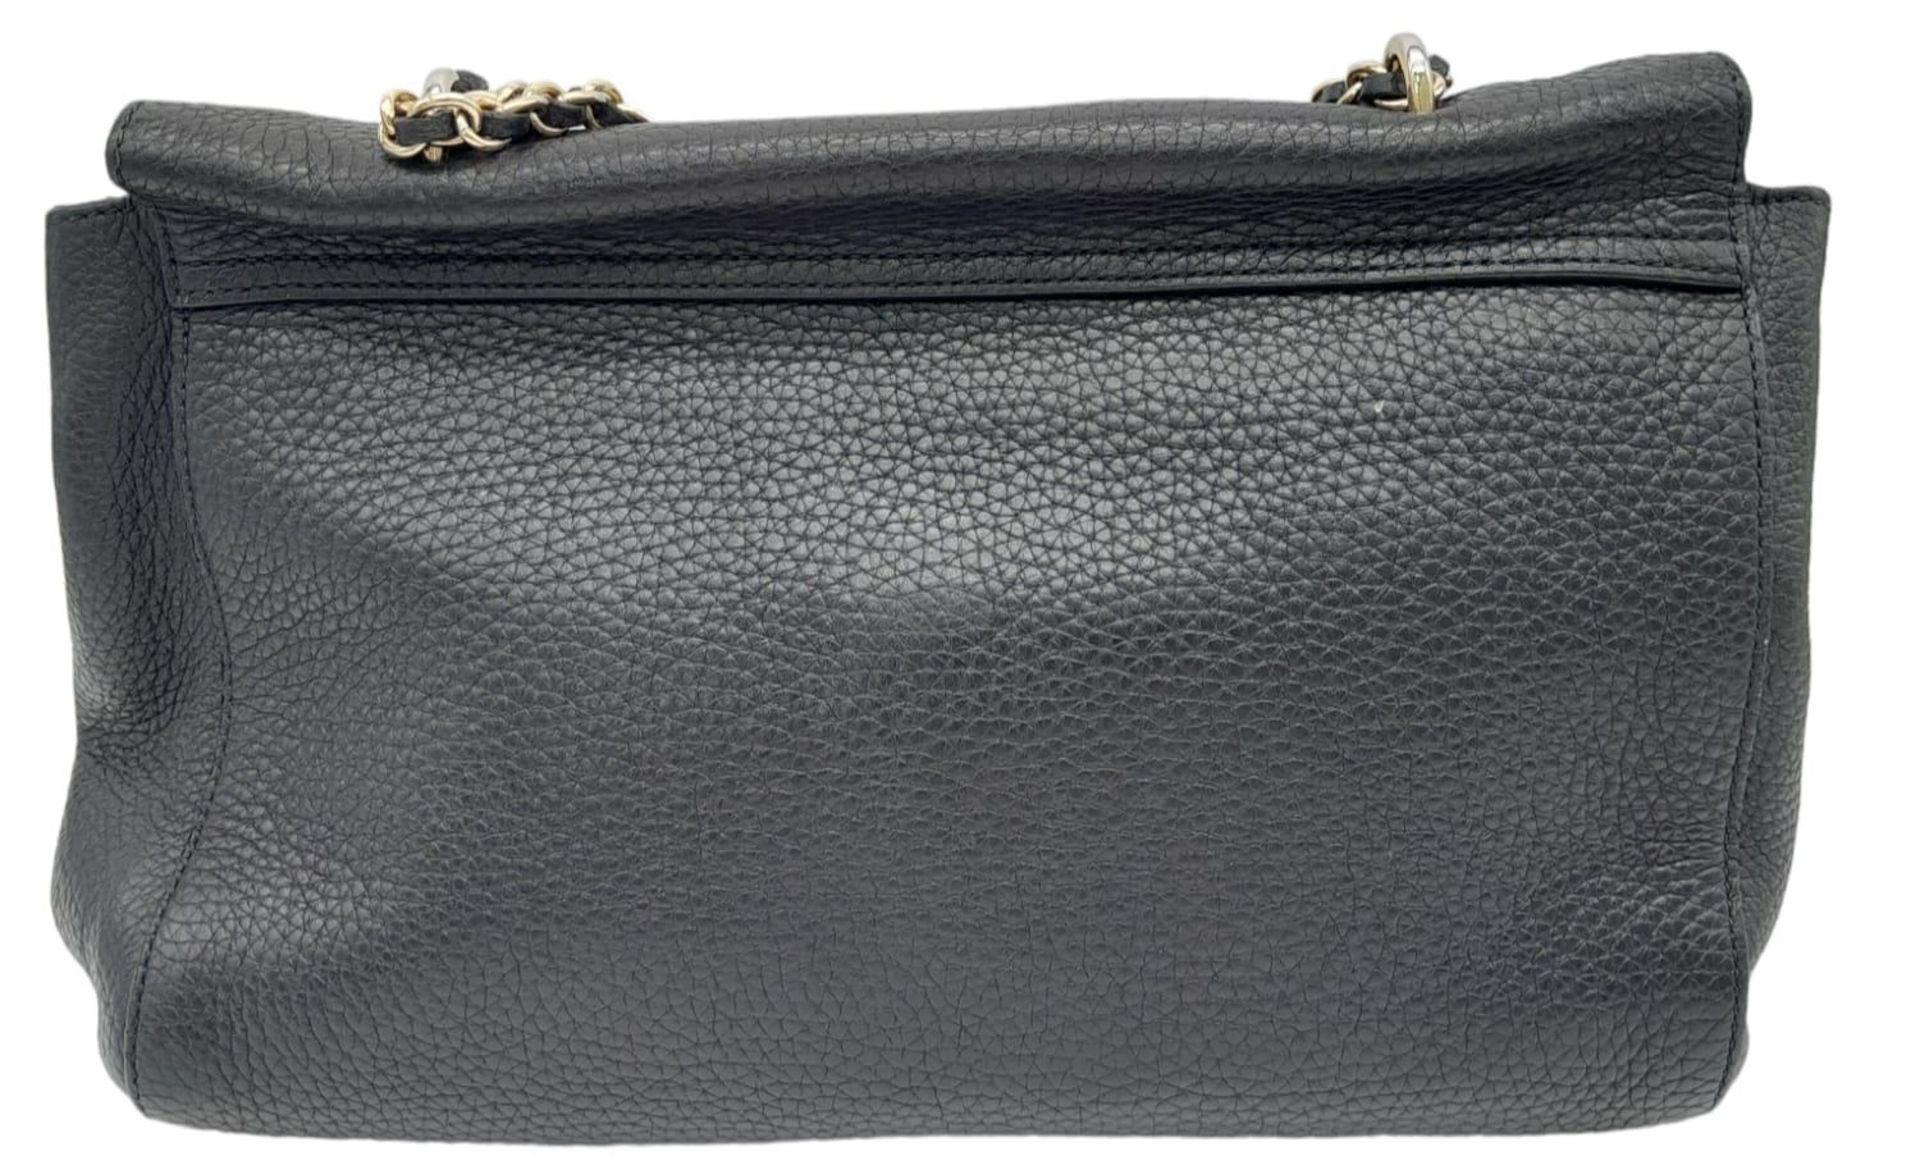 A Black Mulberry Lily Bag. With a Classic Grain Leather, Flap Over Design, Signature Postman Style - Bild 2 aus 10